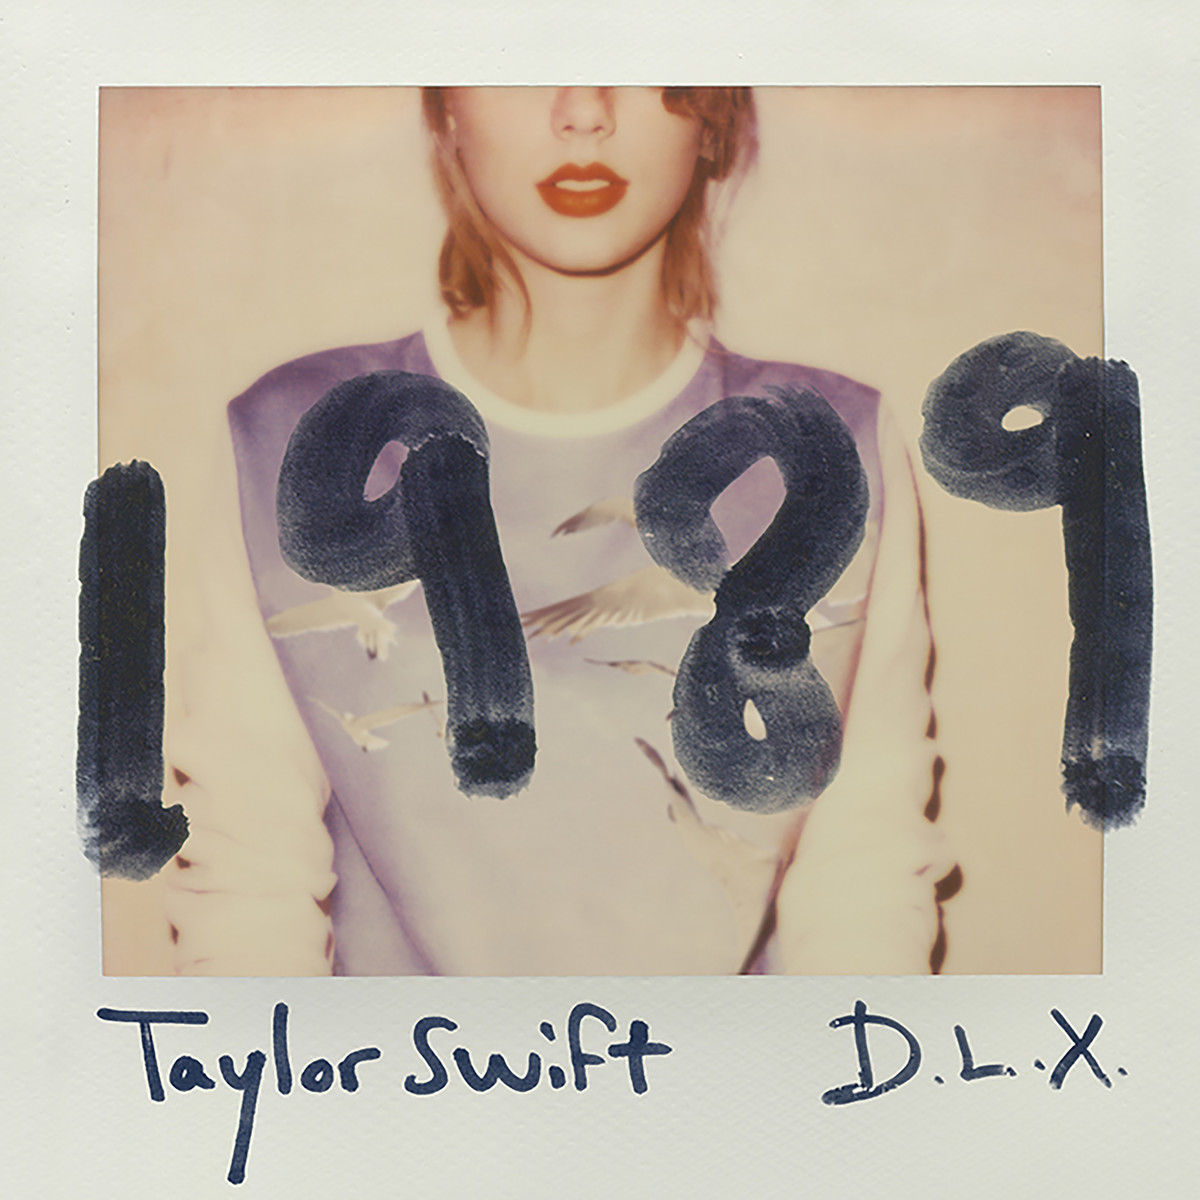 Taylor-Swift-1989-Deluxe-2014-1200x1200